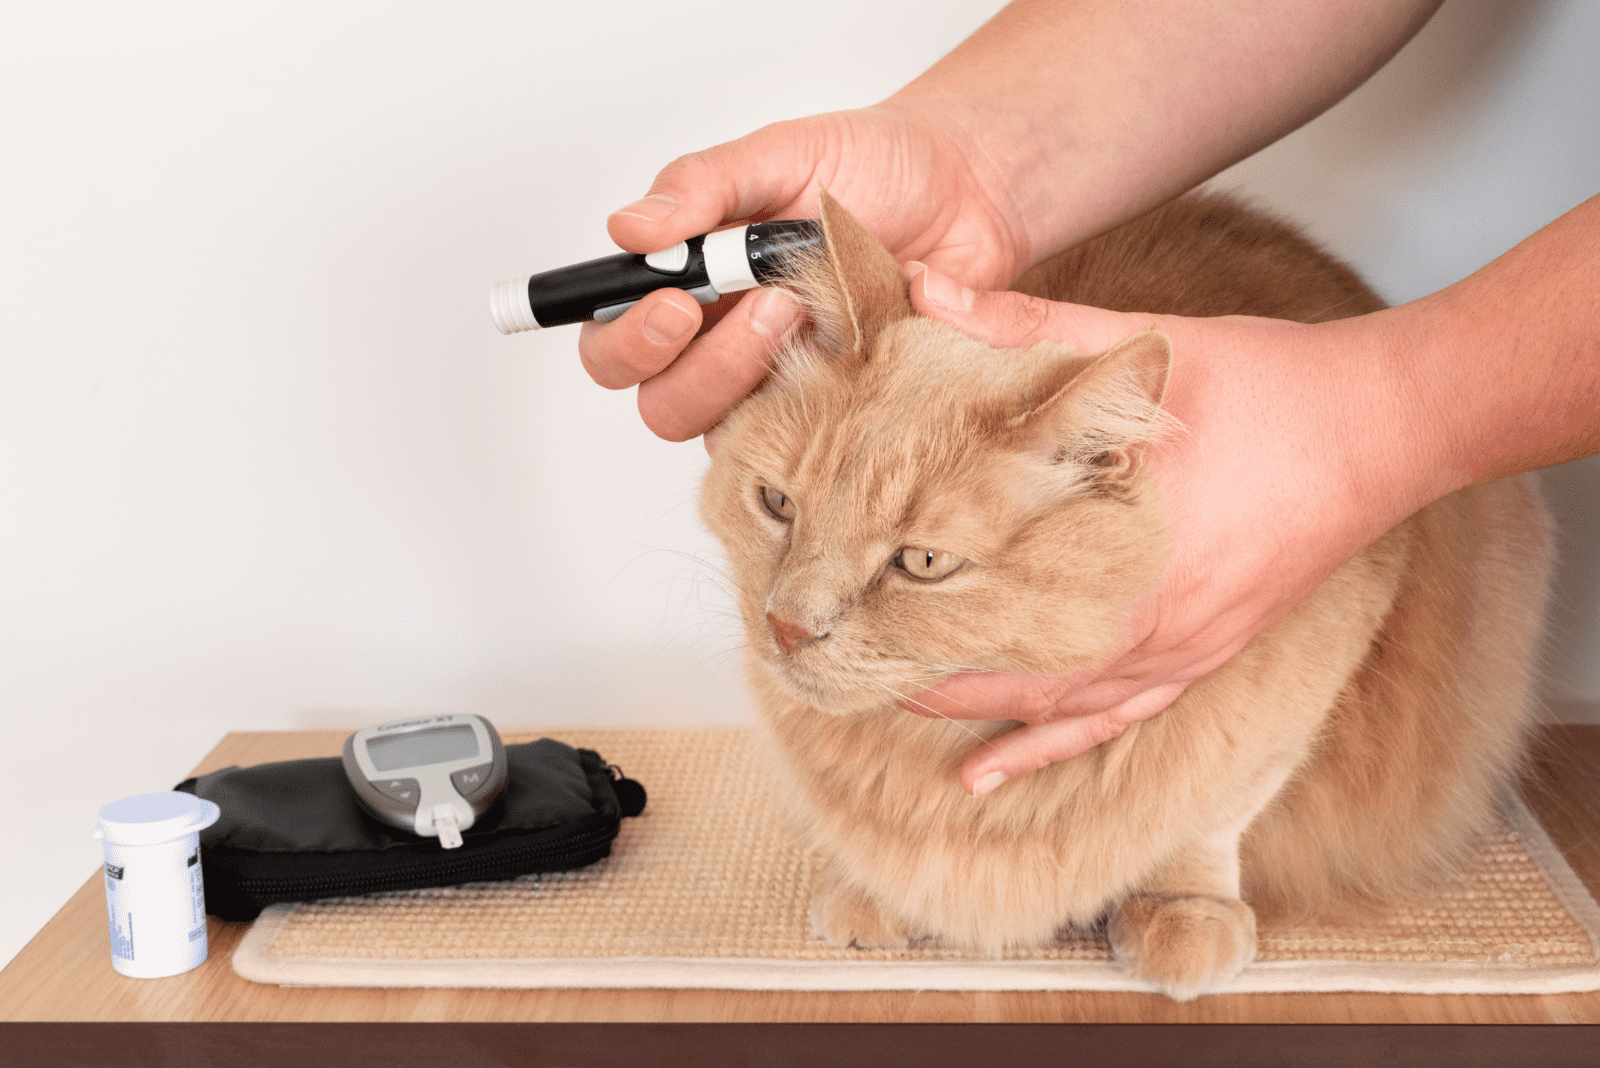 a person measures diabetes in a cat